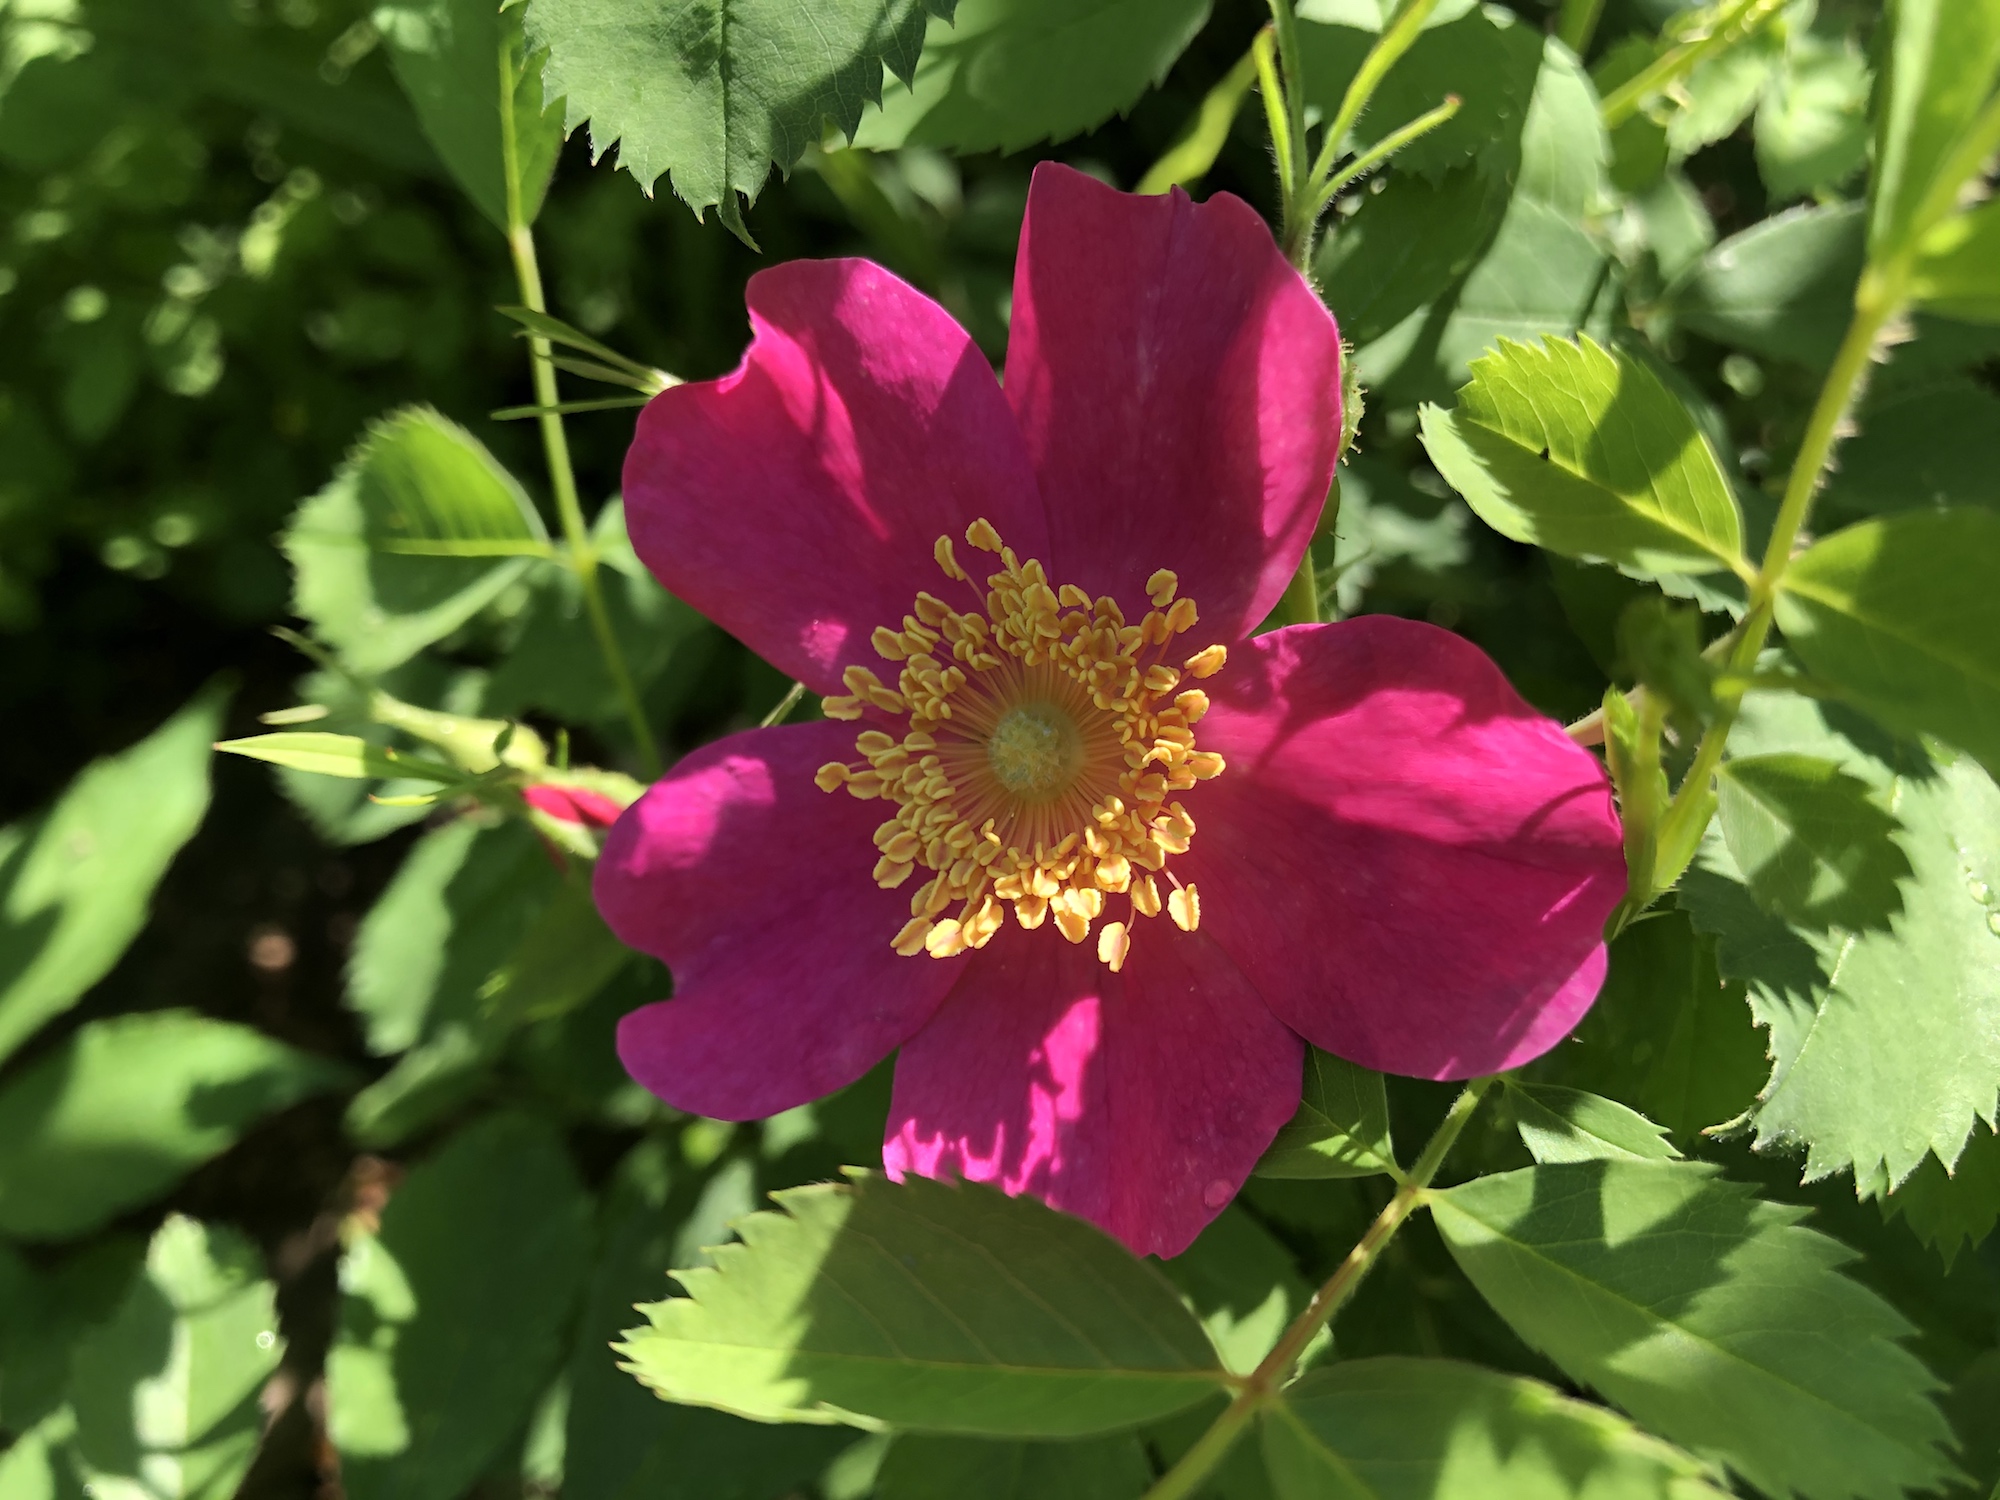 Prairie Rose (Rosa arkansana) at Council Ring in Madison, Wisconsin on June 11, 2020.